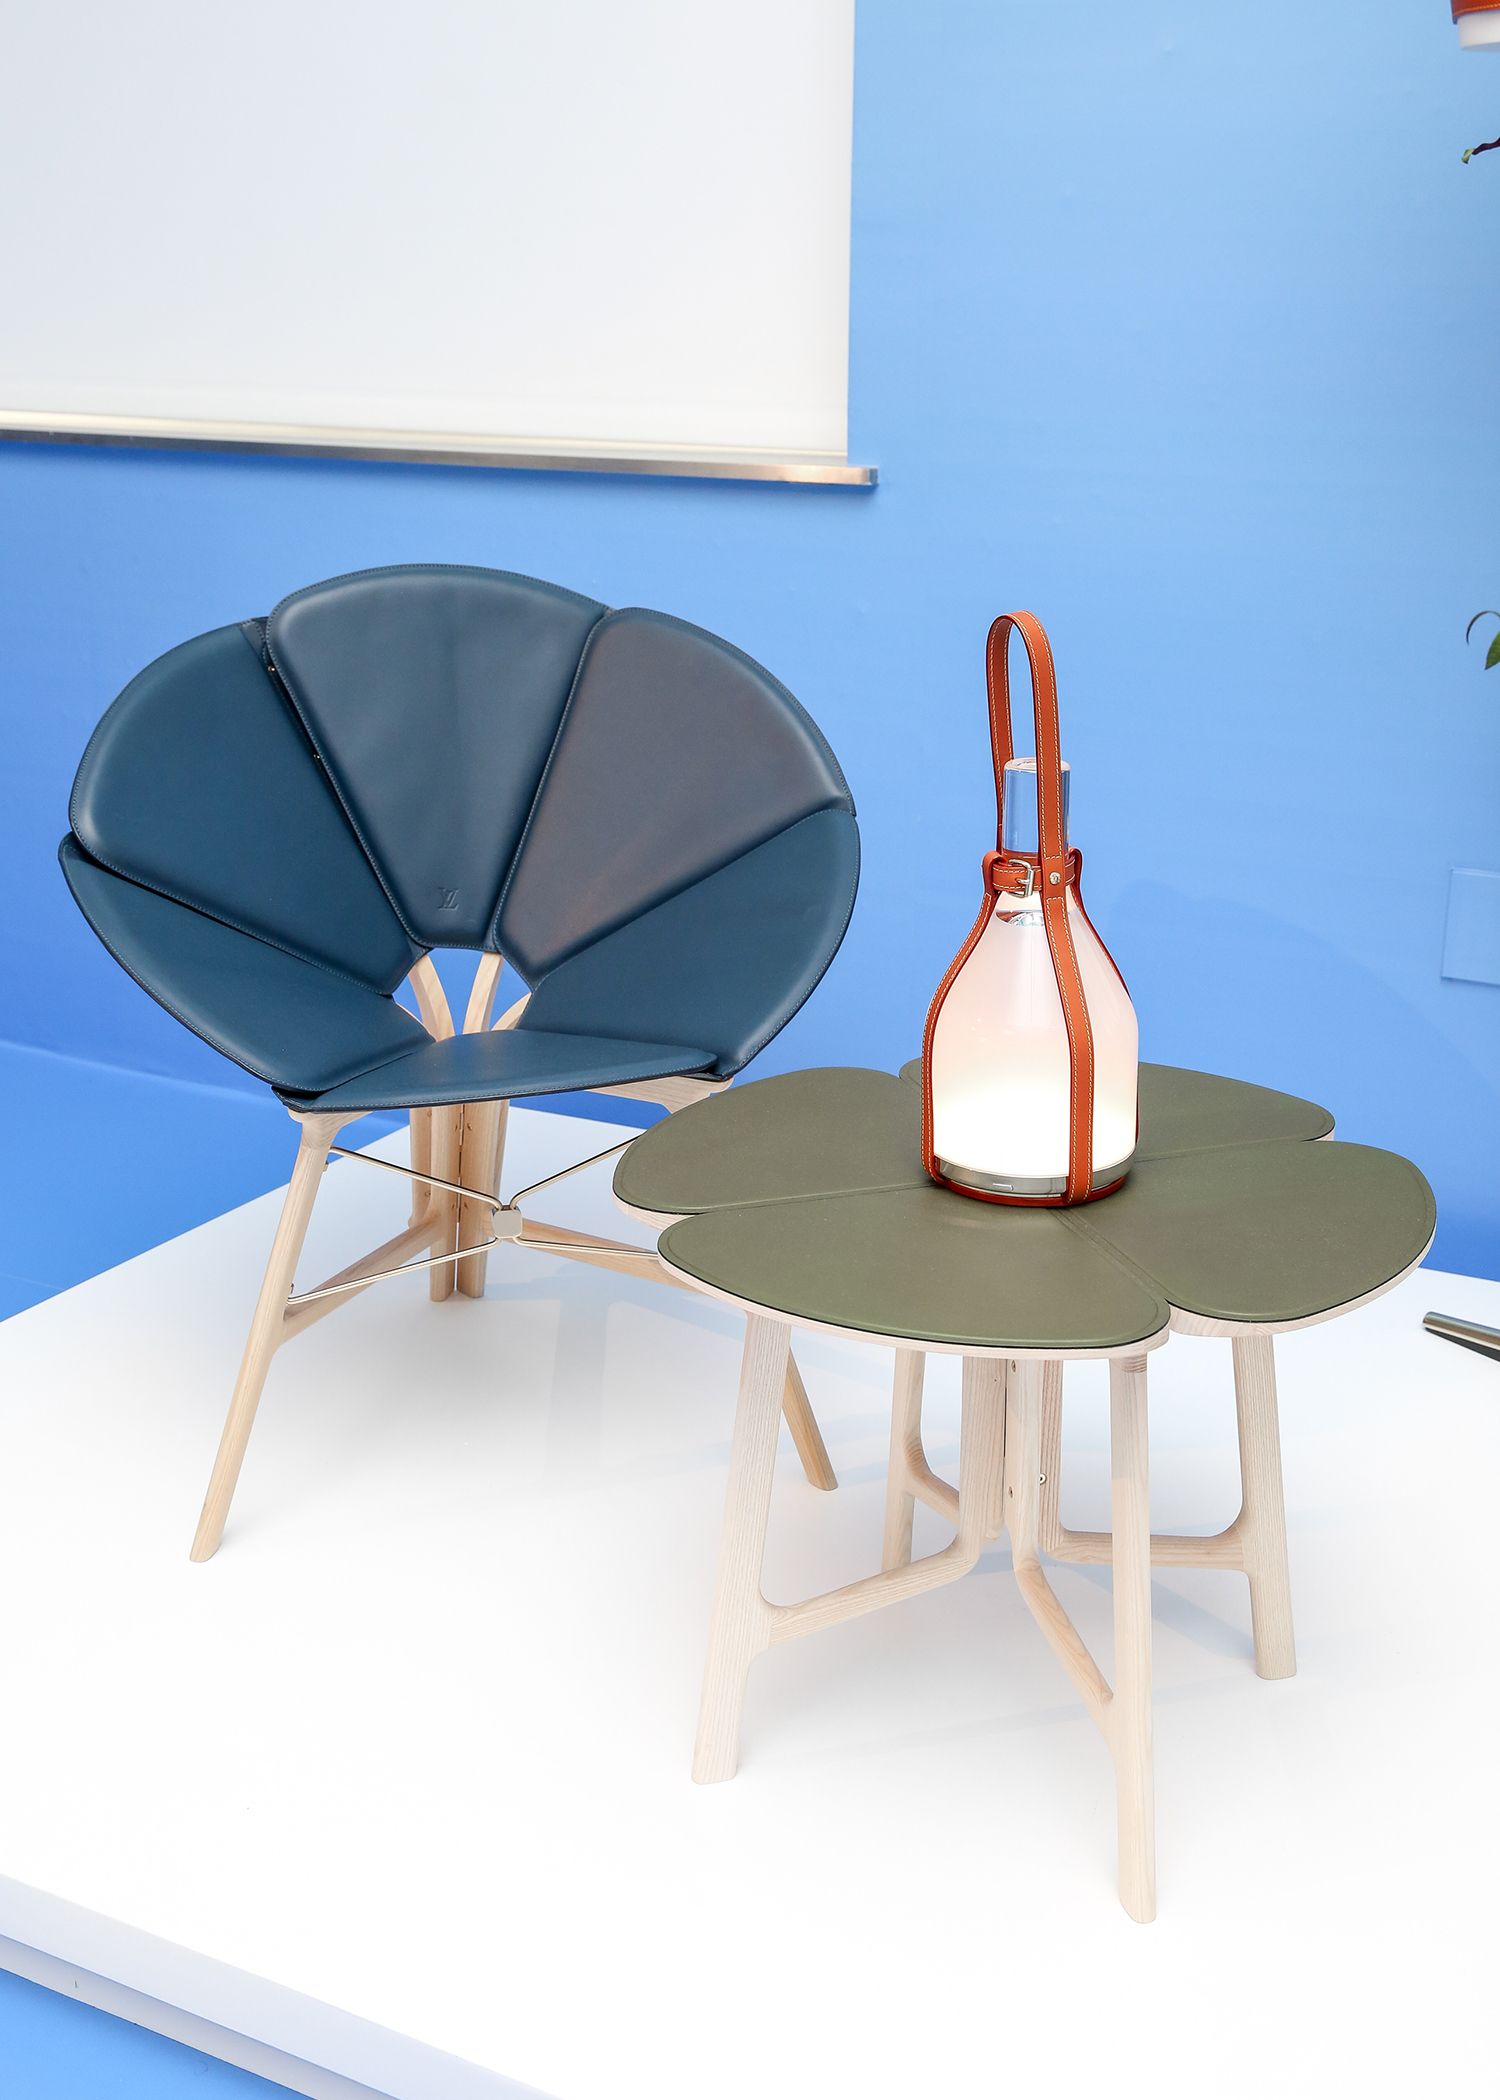 10 Louis Vuitton Furniture Designs For The BYO Traveler. – The